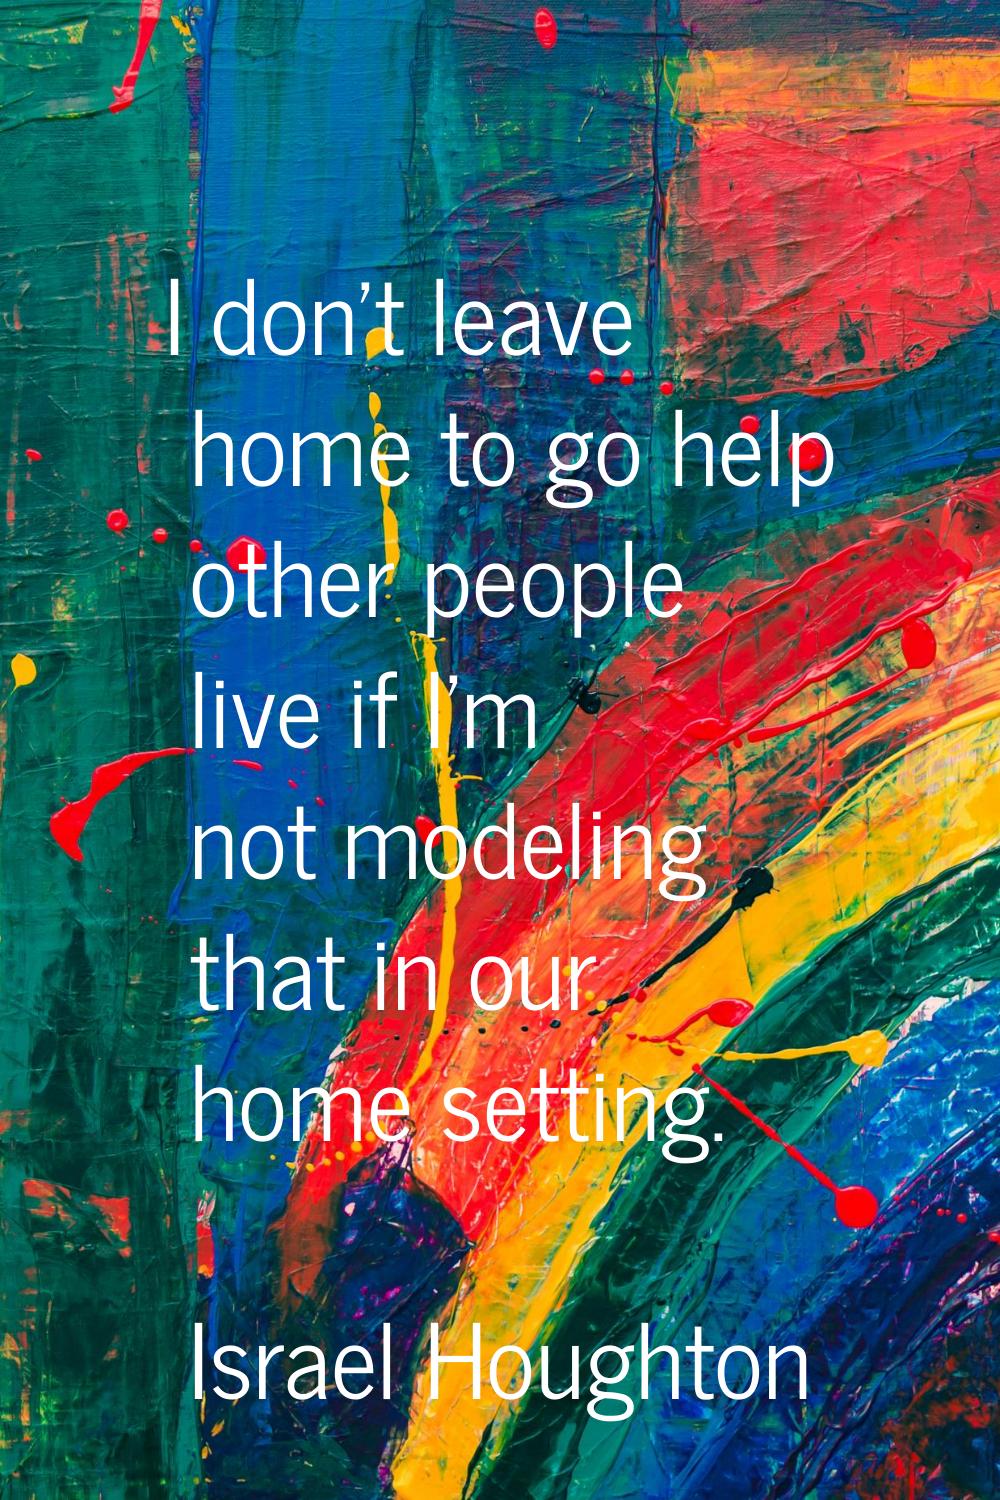 I don't leave home to go help other people live if I'm not modeling that in our home setting.